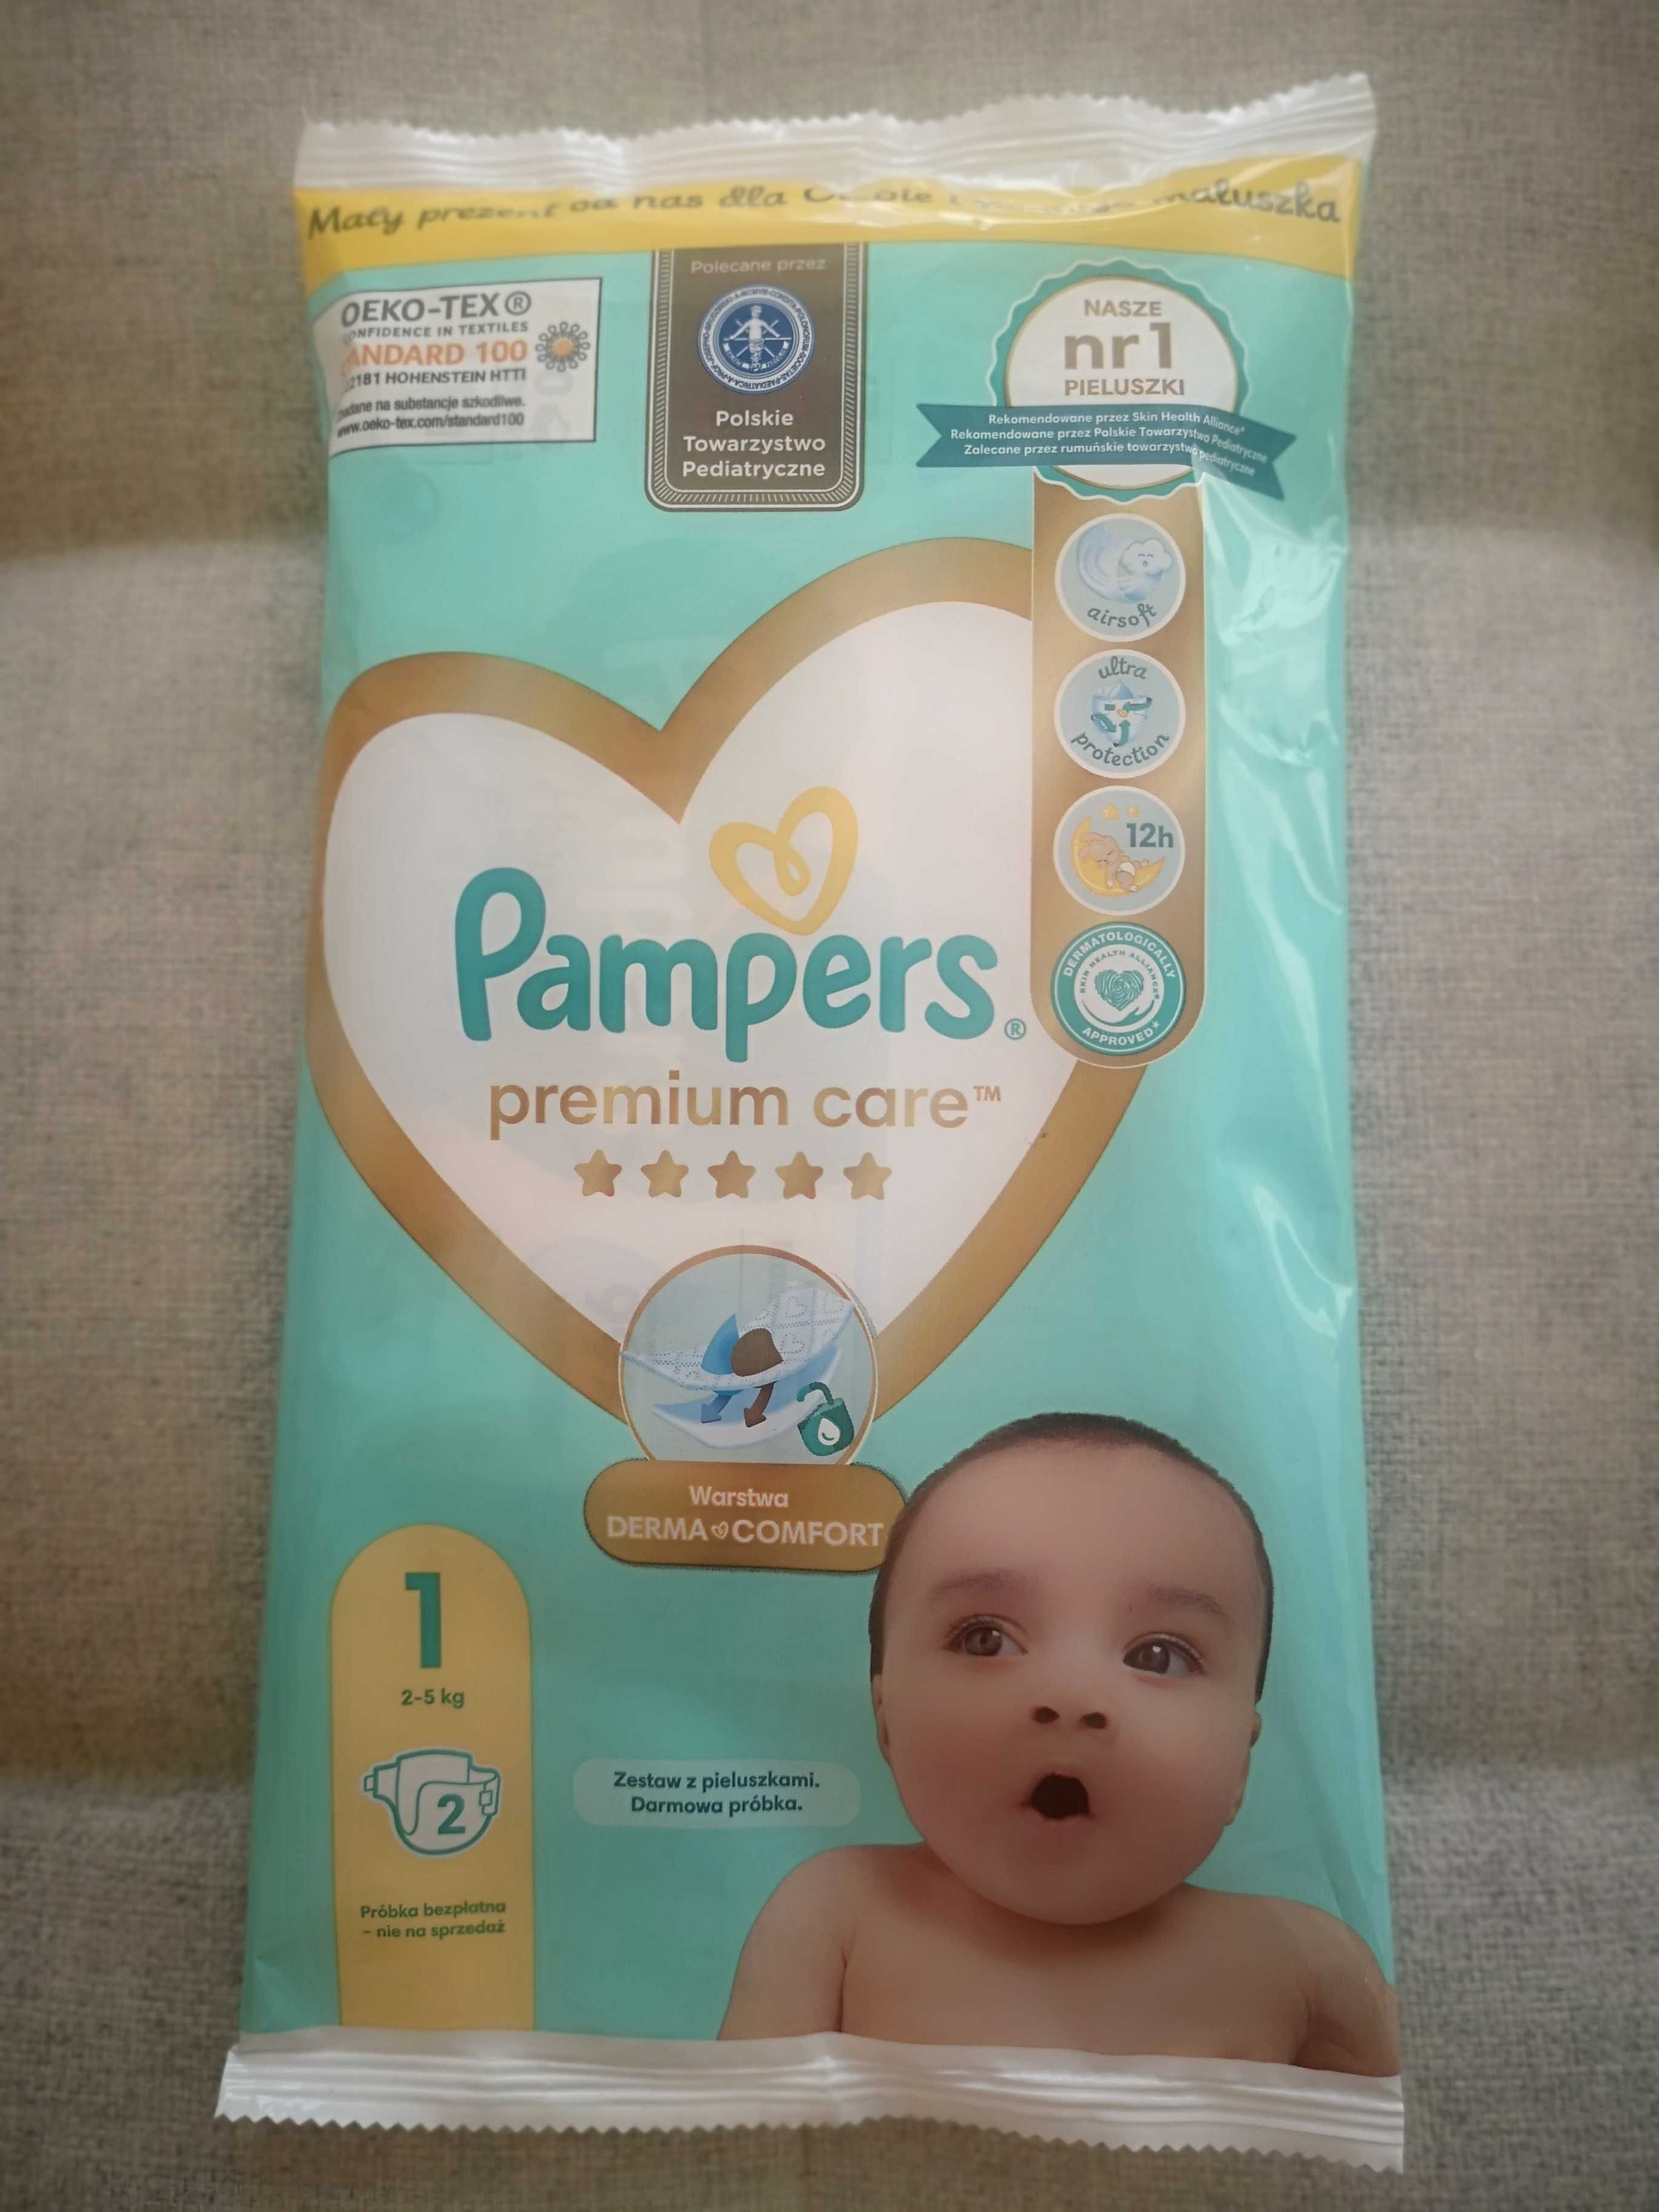 Delicol, Sterimar, Symbiosys, Asecurin, Mam, Pampers